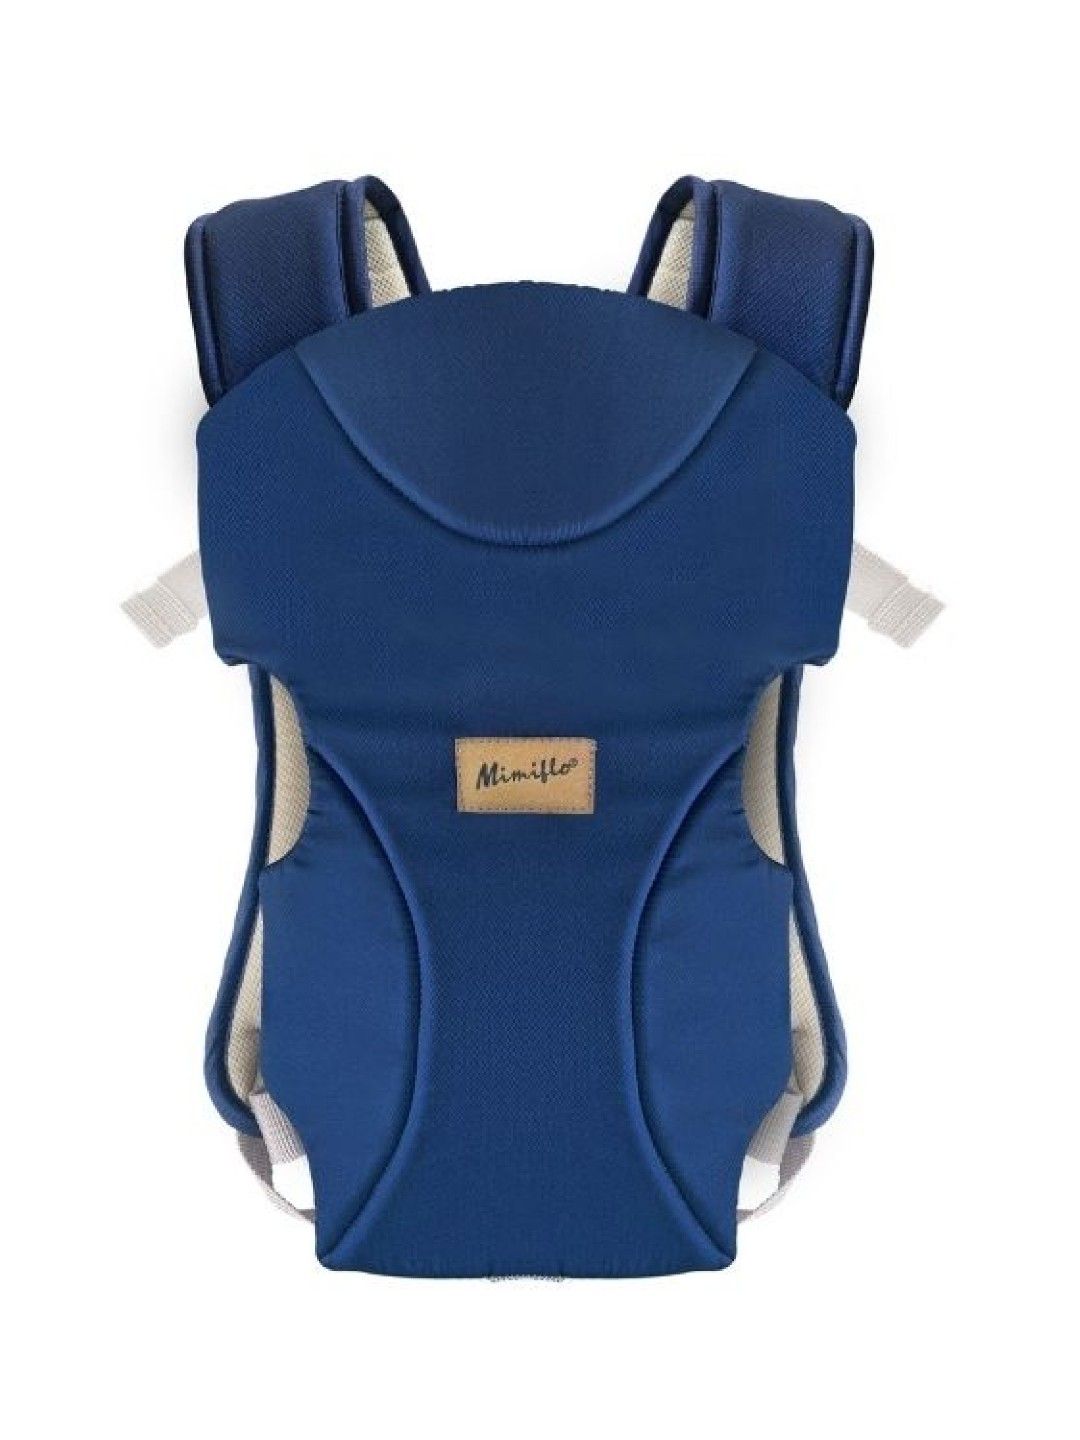 Mimiflo Soft 5-Way Baby Carrier